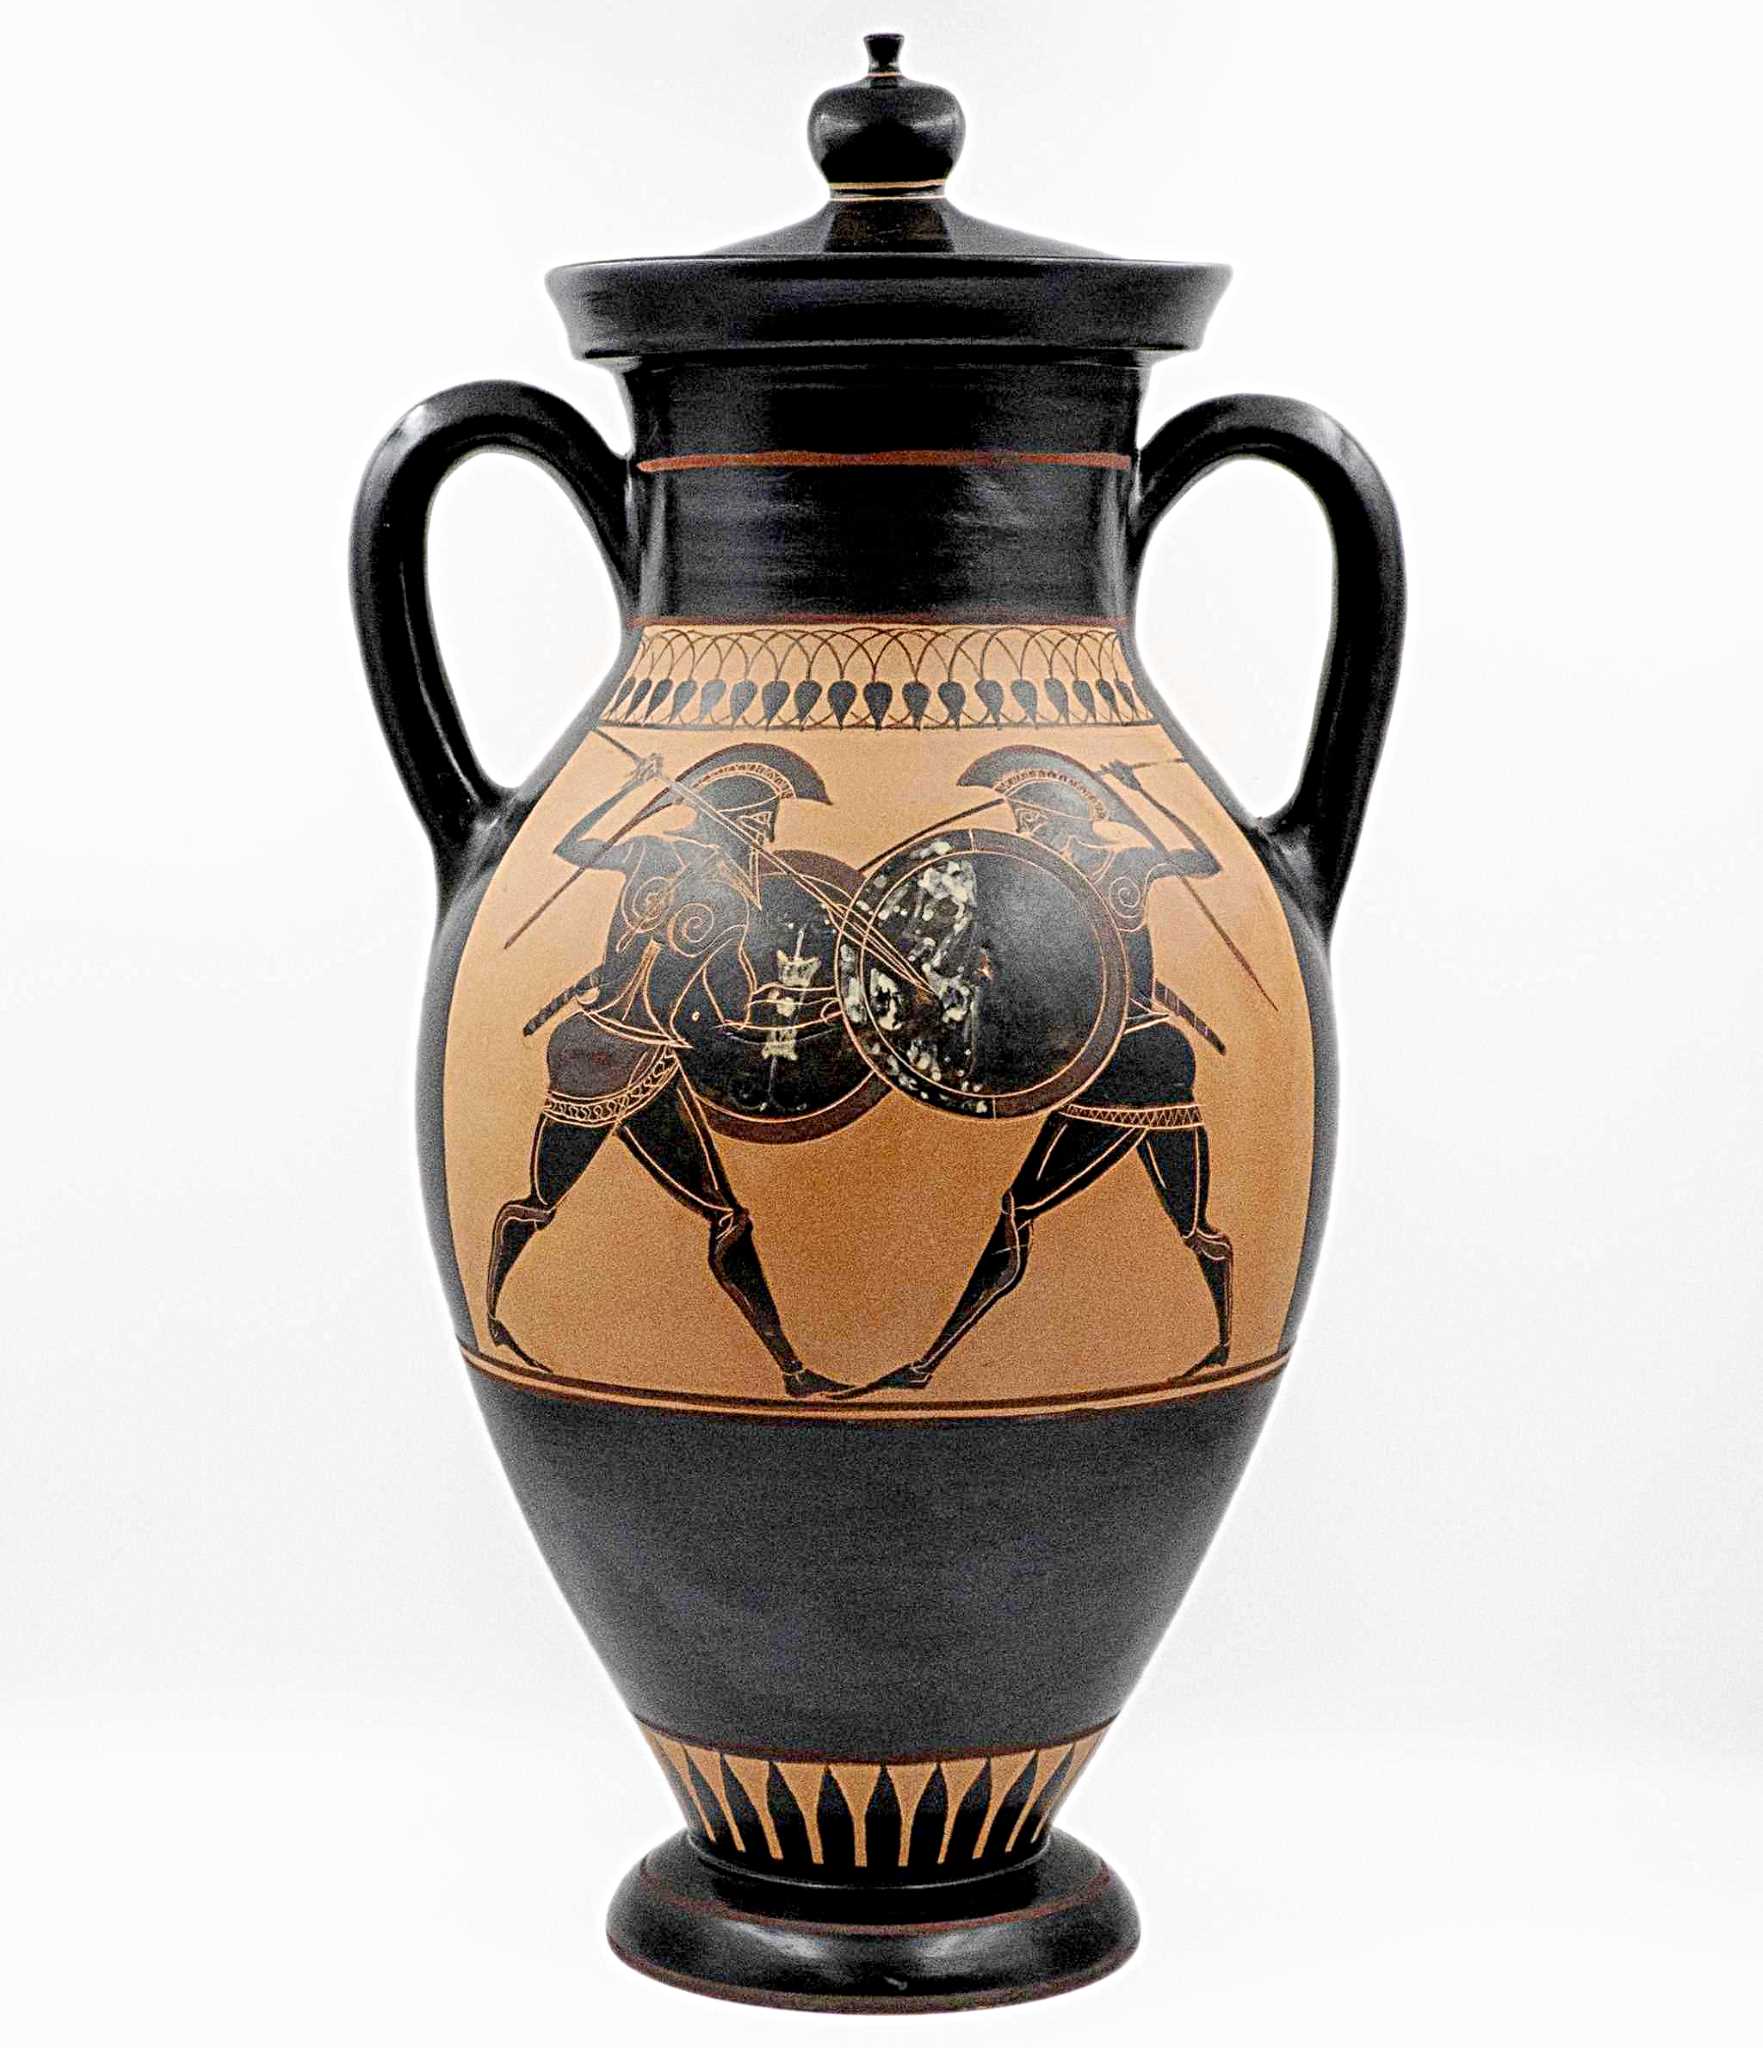 Grecian Urns were pieces of art that were useful as well as beautiful